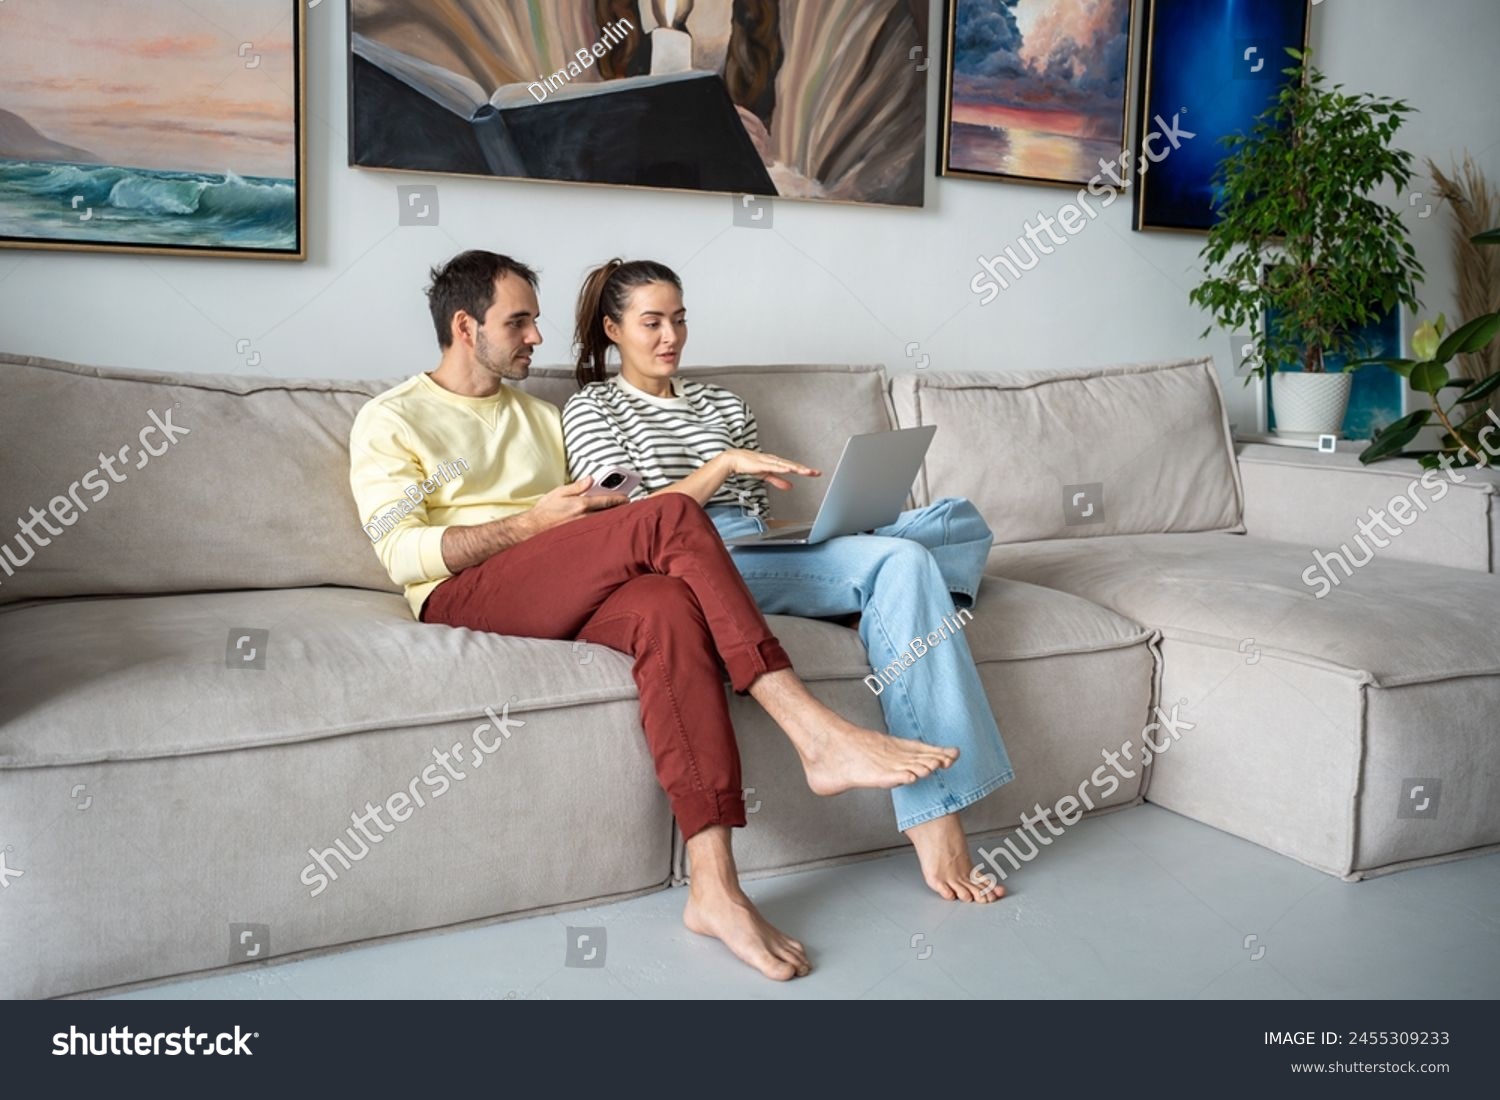 Pleasant family couple artists sits on couch looking at laptop screen browsing internet together. Creative young married spouse web surfing, making purchases online, booking flight tickets for travel. #2455309233